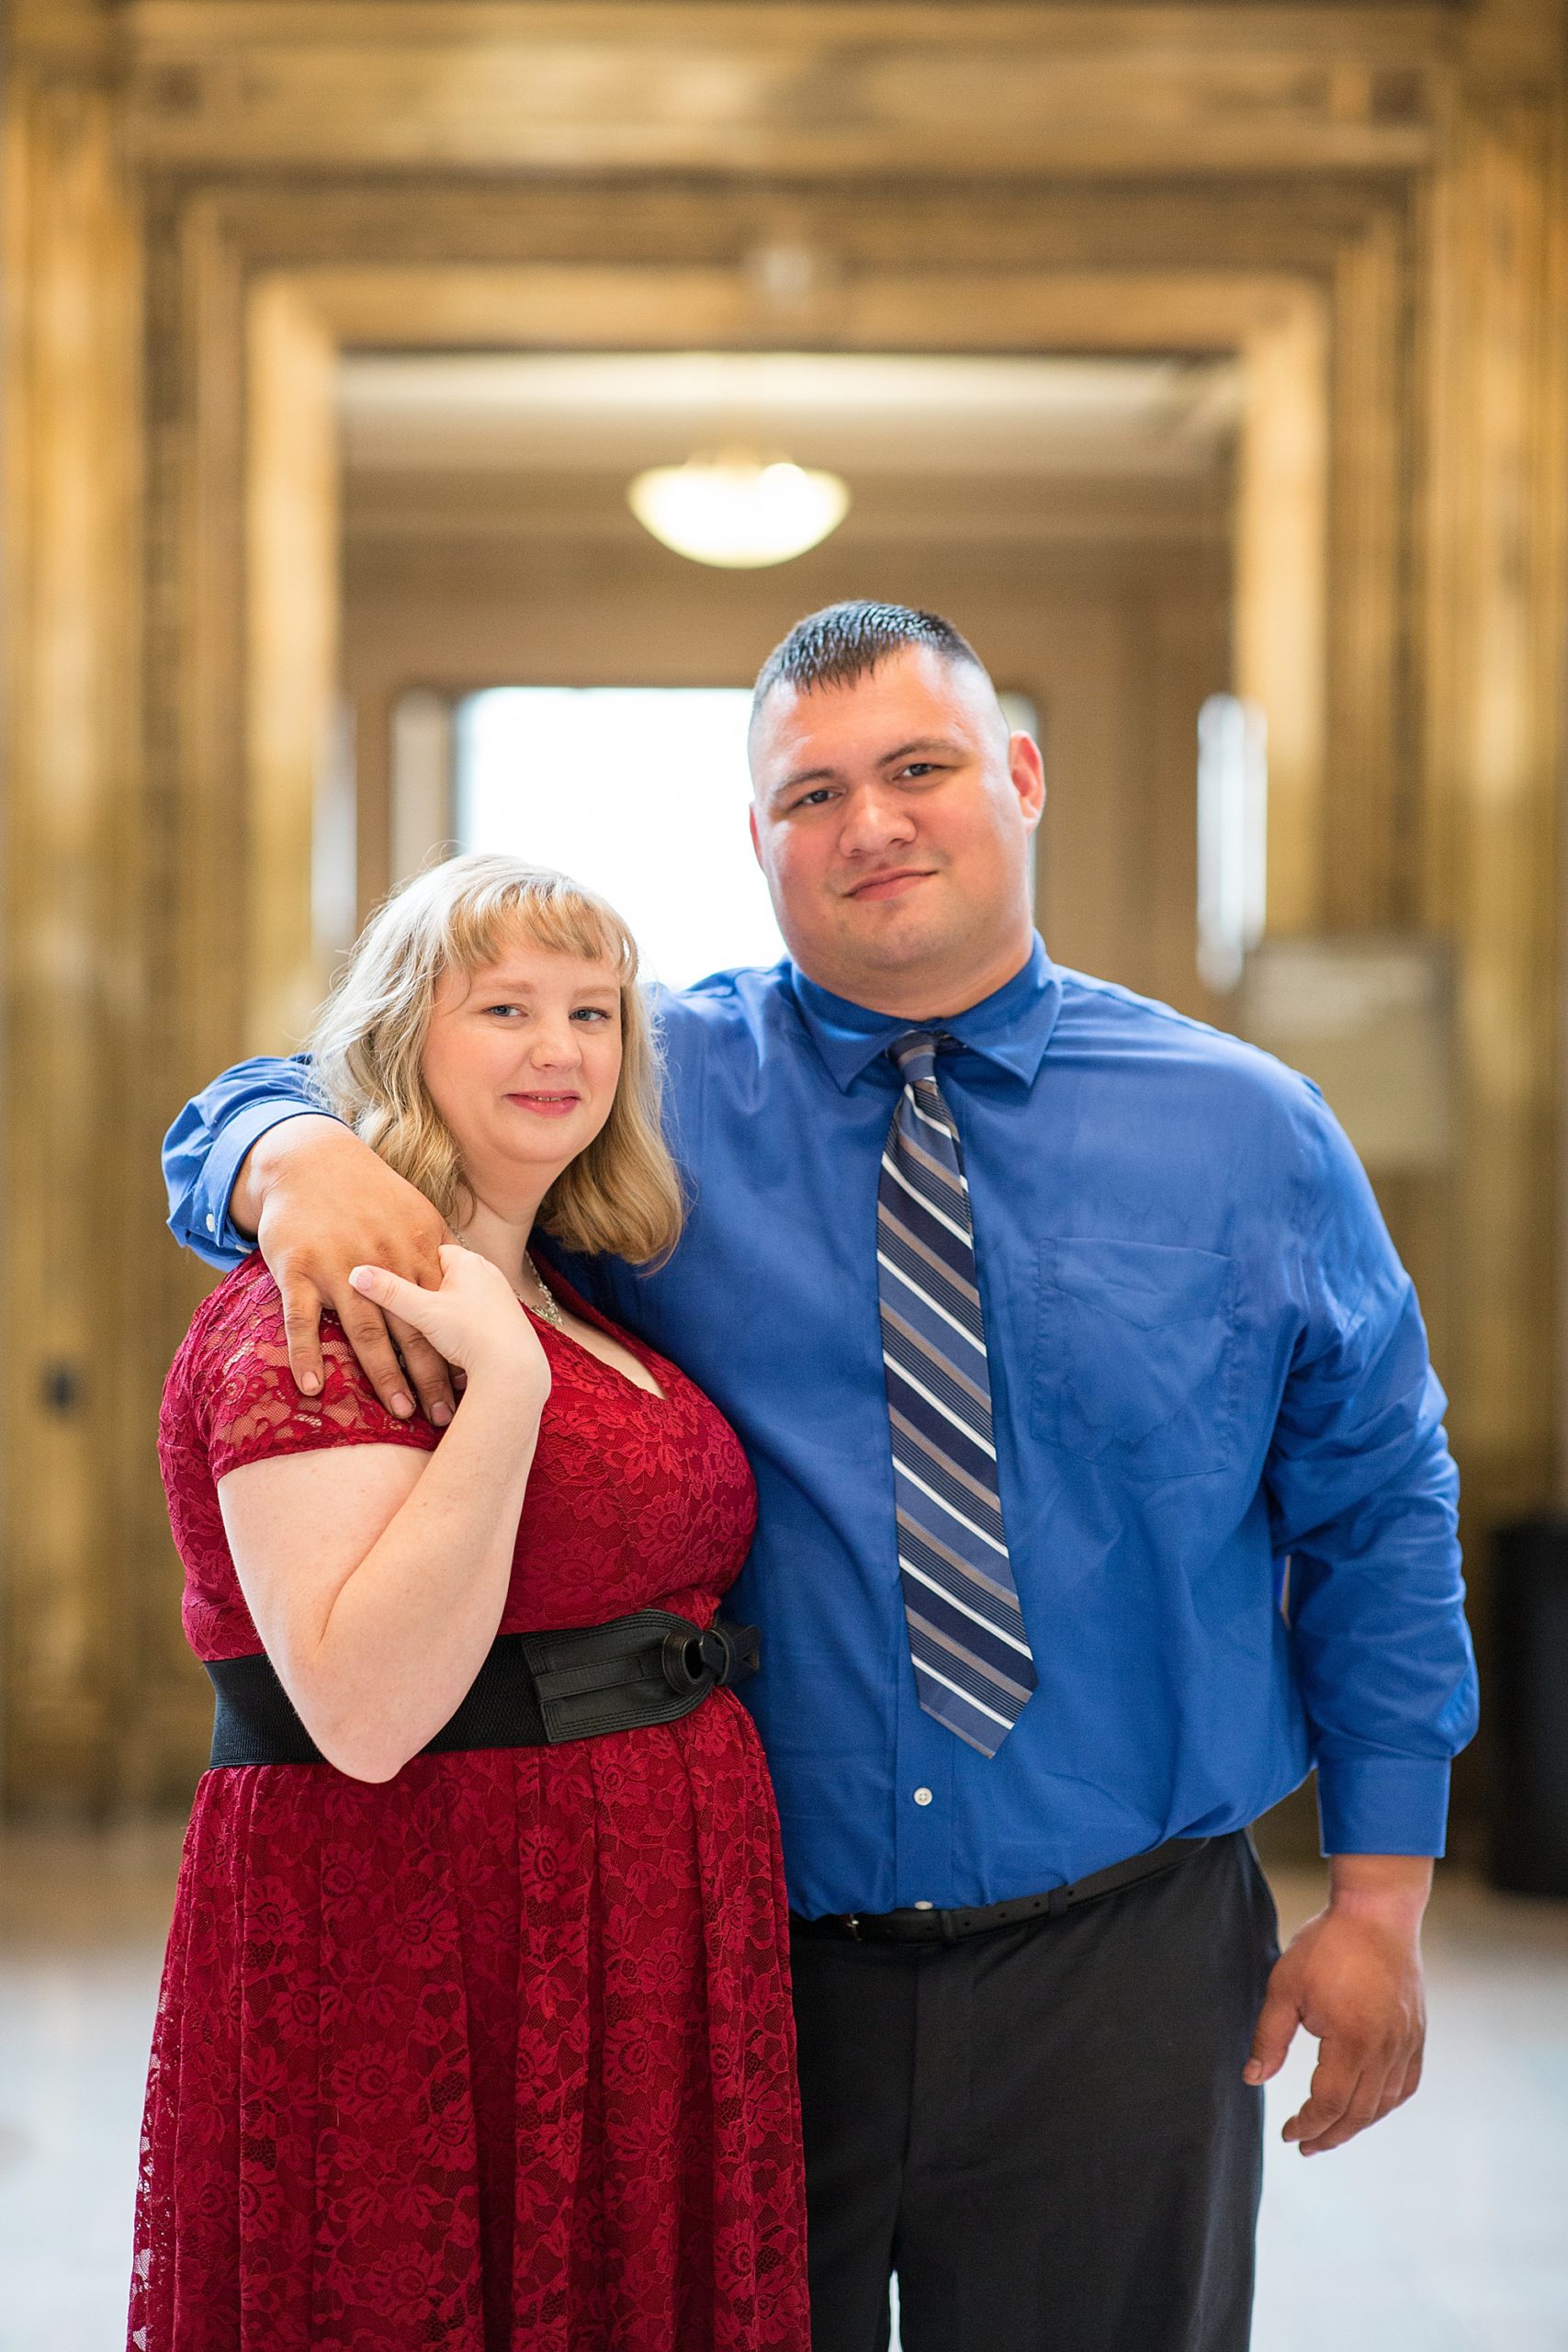 engaged couple poses in gold doorframe at Central Library